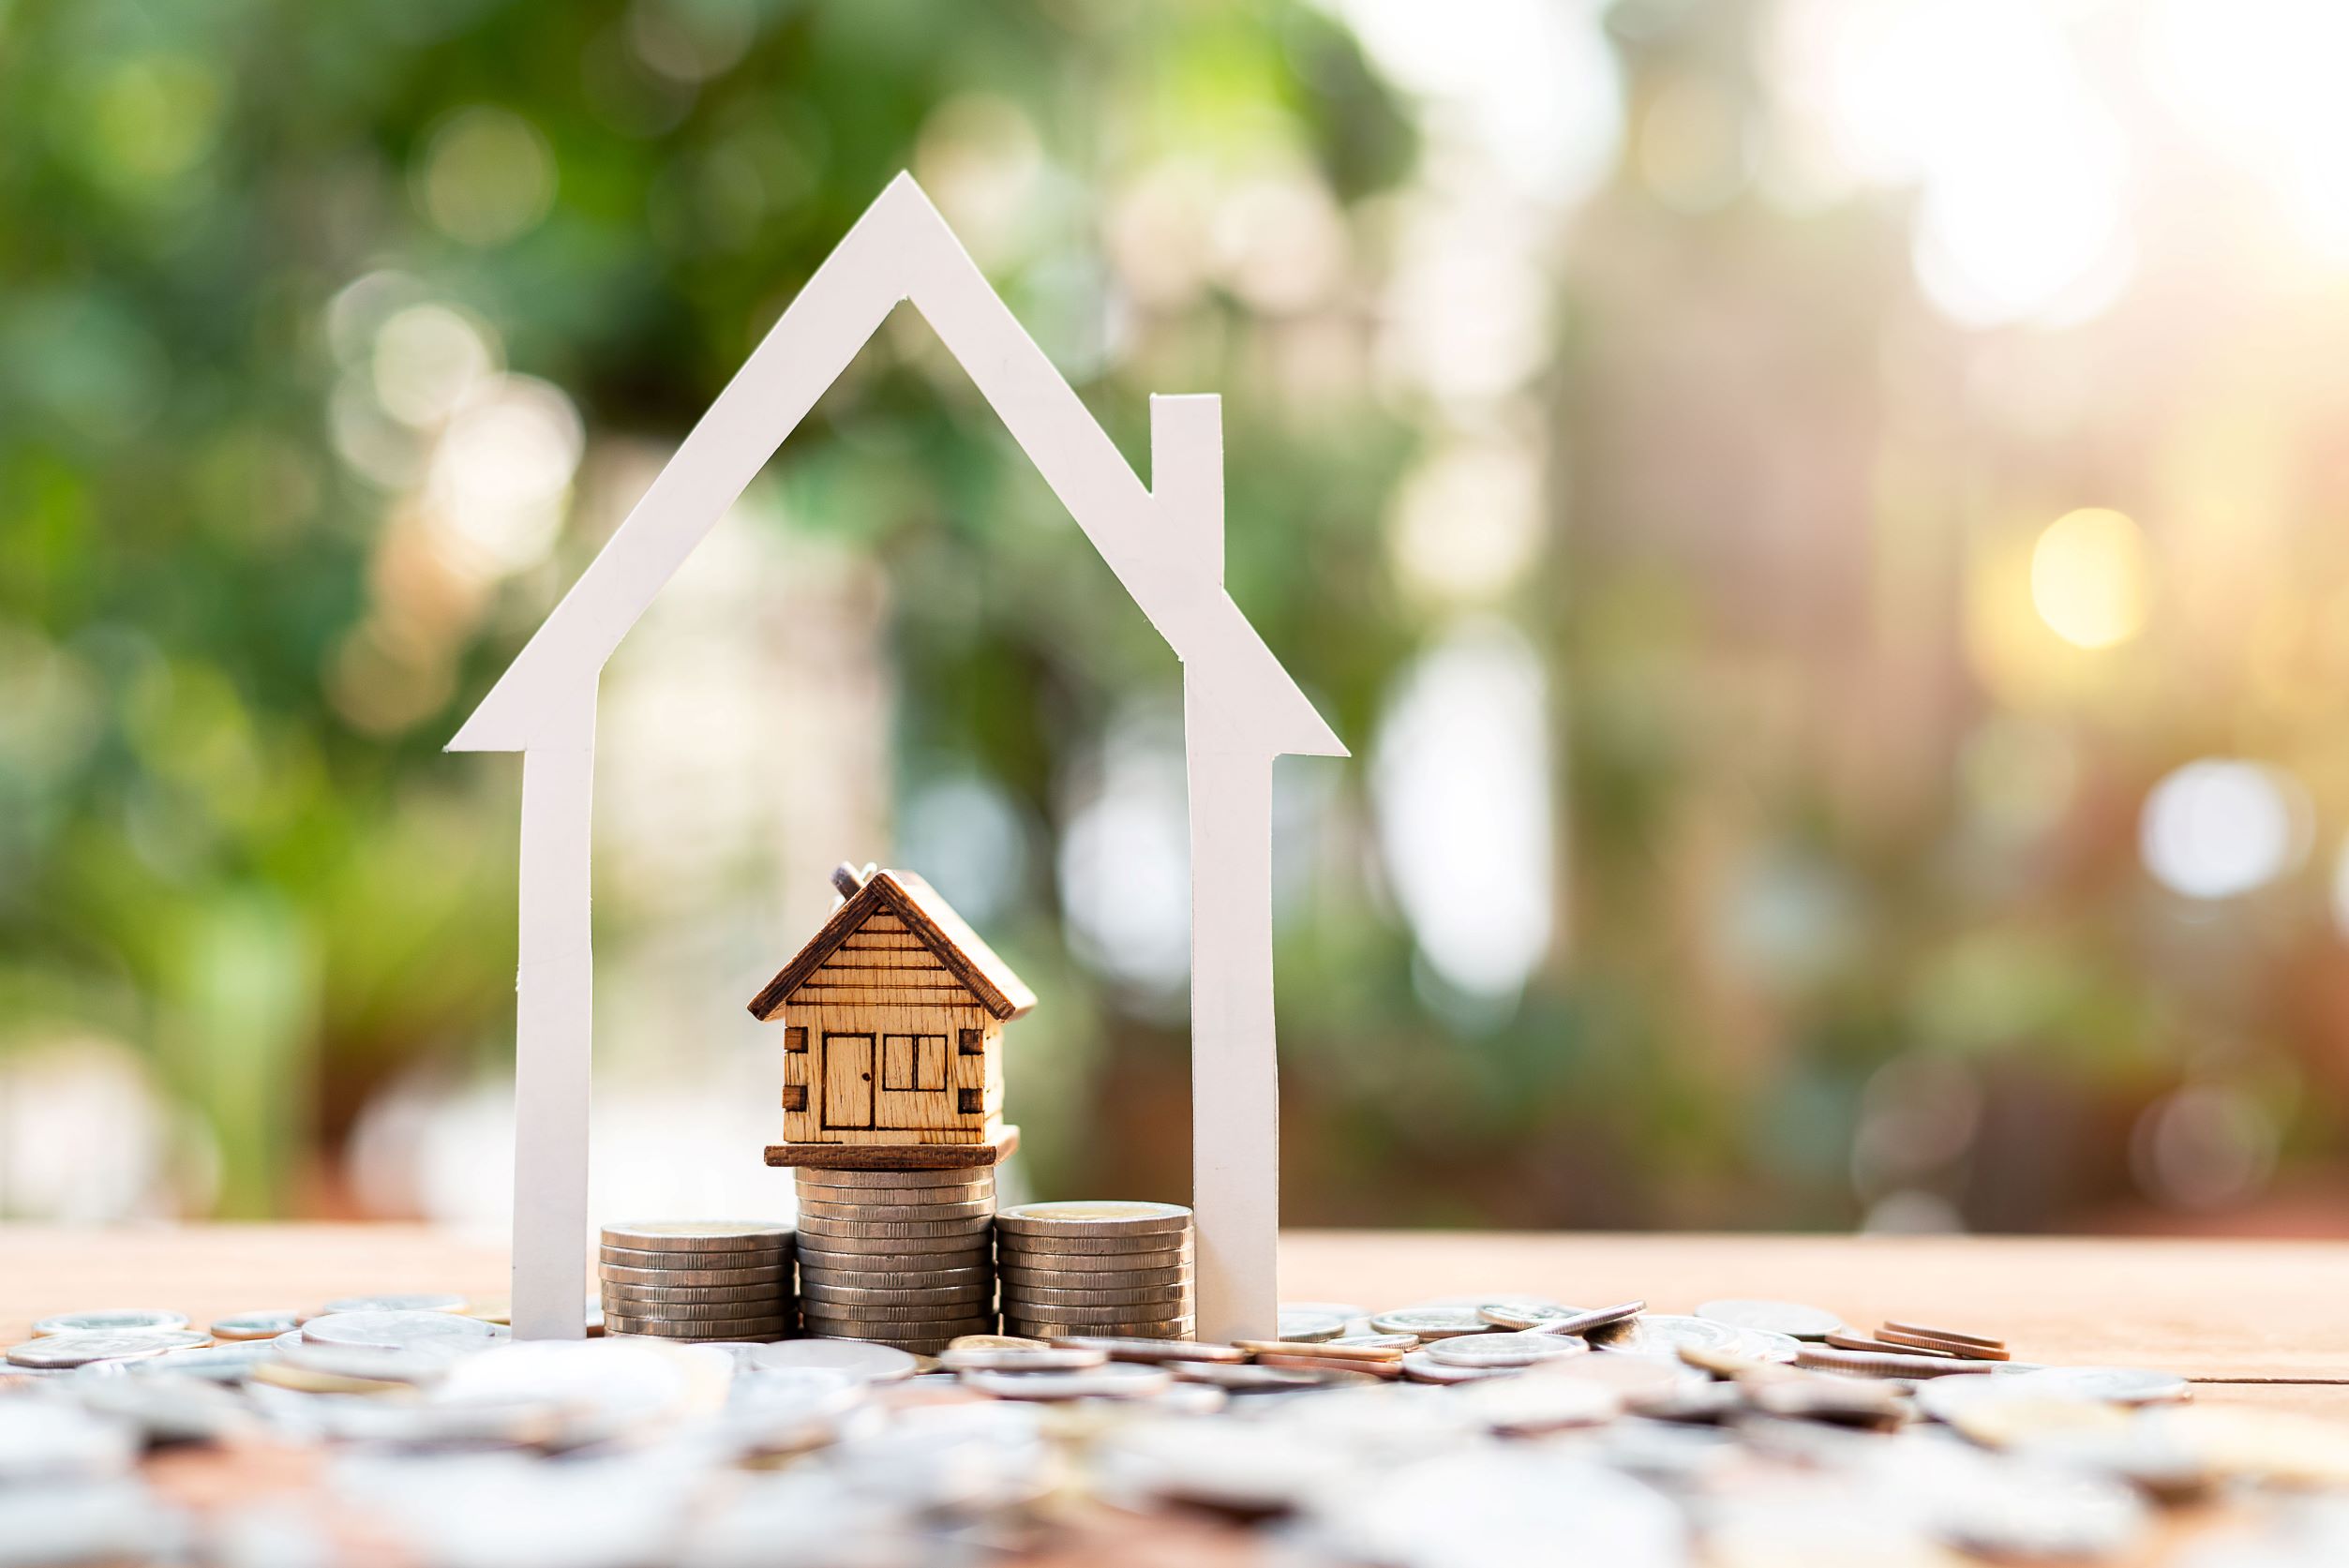 House Model - Real Estate Investment and Rental Property Income: is it right for you? - Maine SBDC